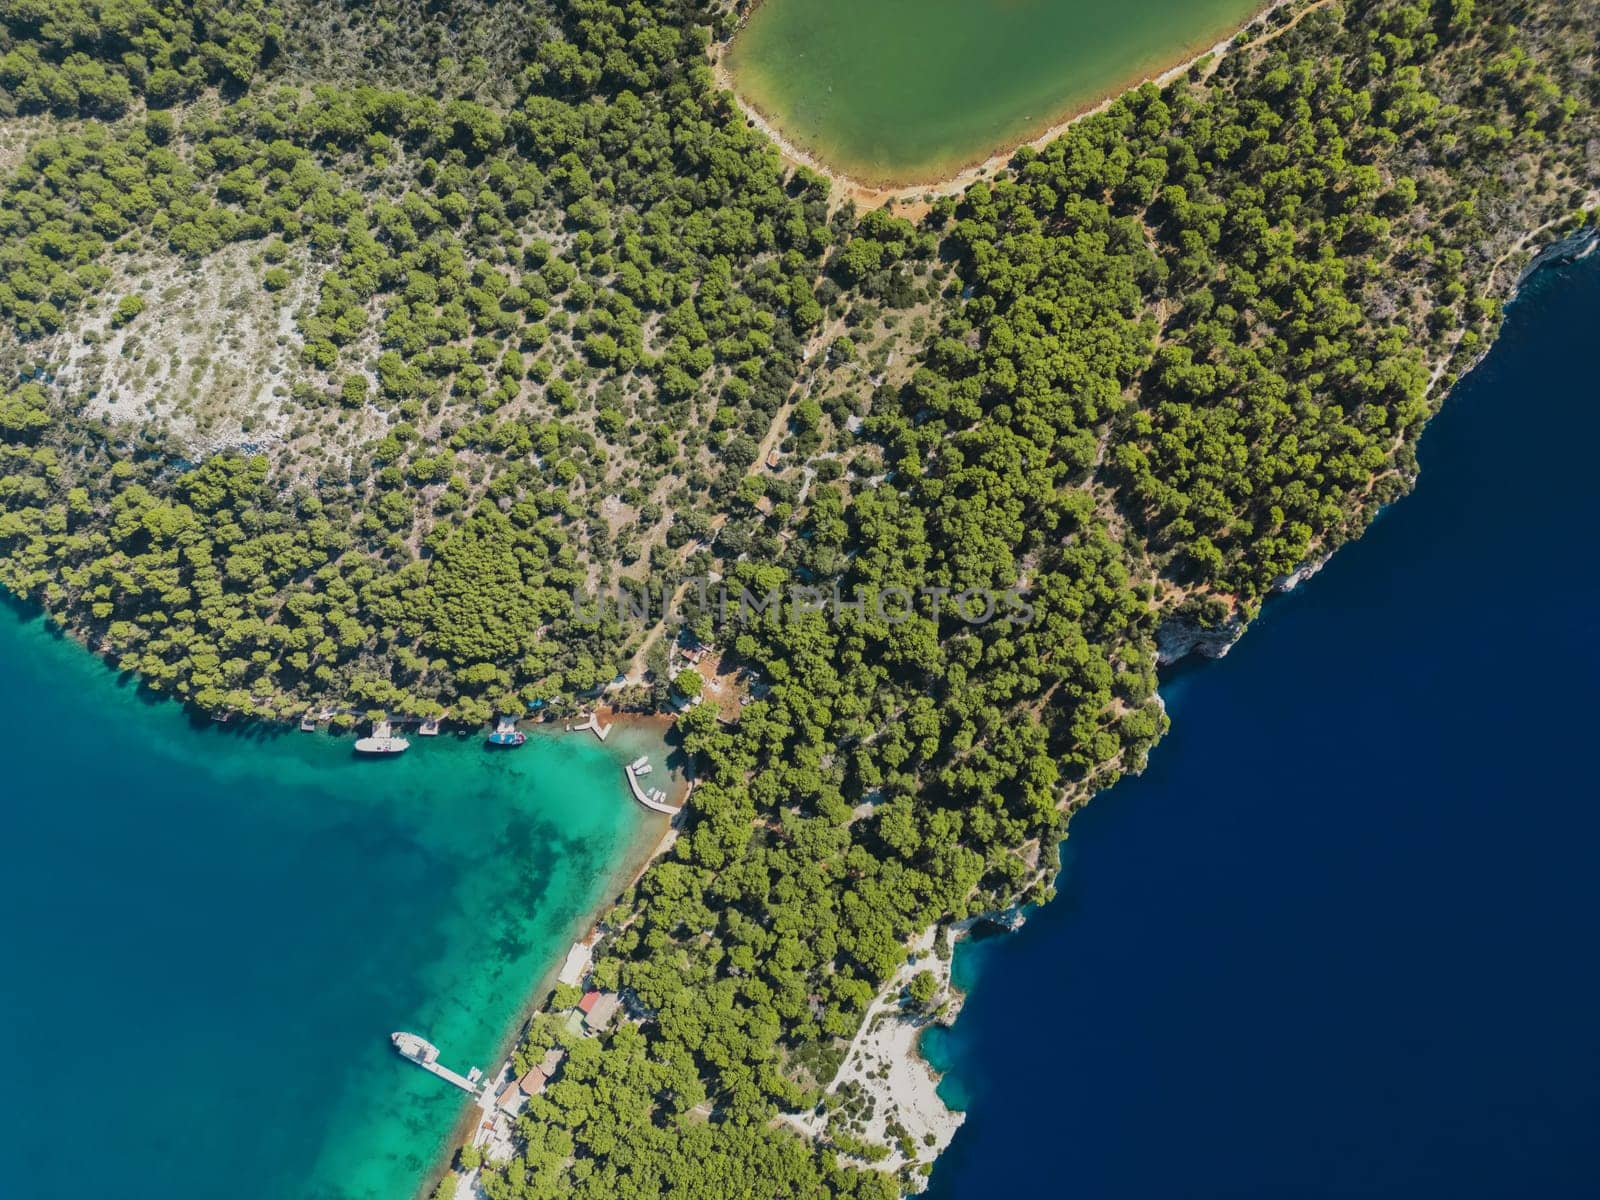 Aerial drone top view photo of deep turquoise and emerald blue water and land in Telascica National Park, Croatia